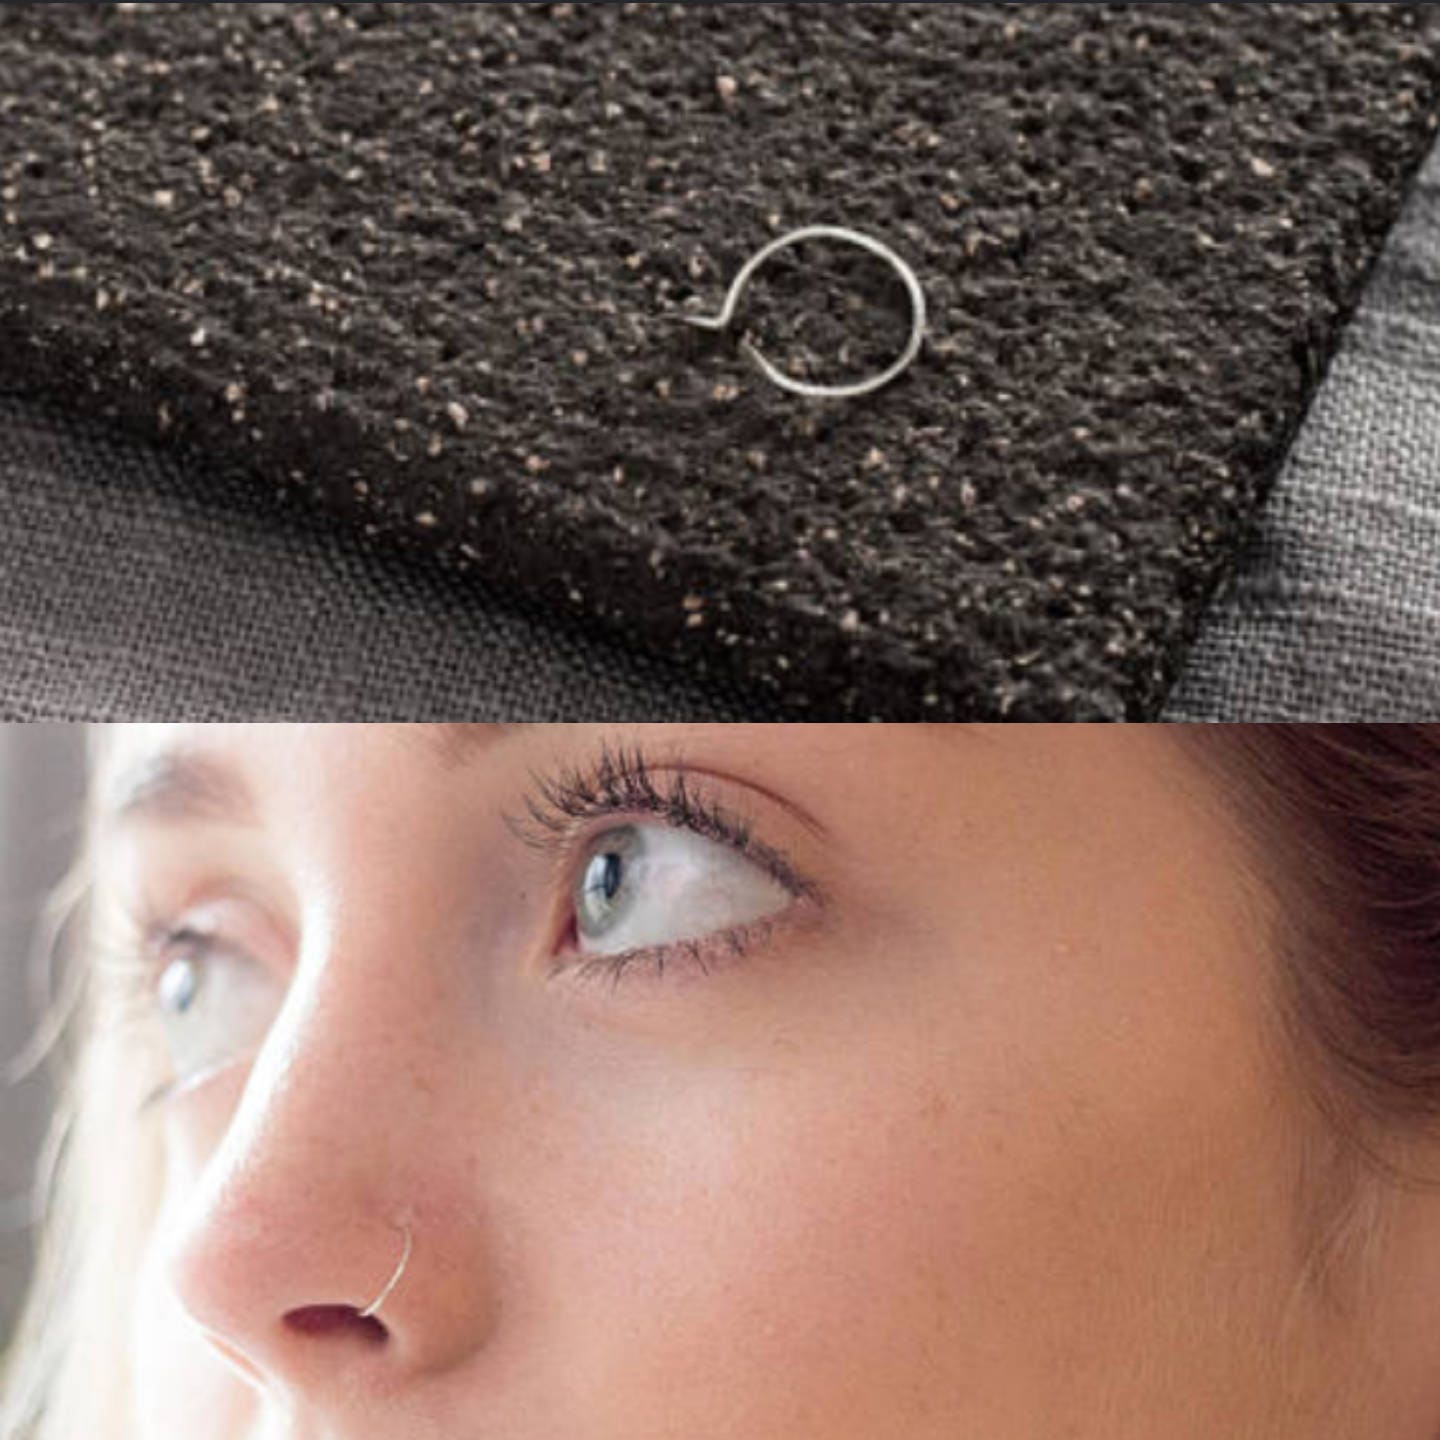 Buy Gold Faux Nose Ring No Piercing Needed, 10 to 6mm Fake Nose Ring, Cuff Nose  Ring Online in India - Etsy